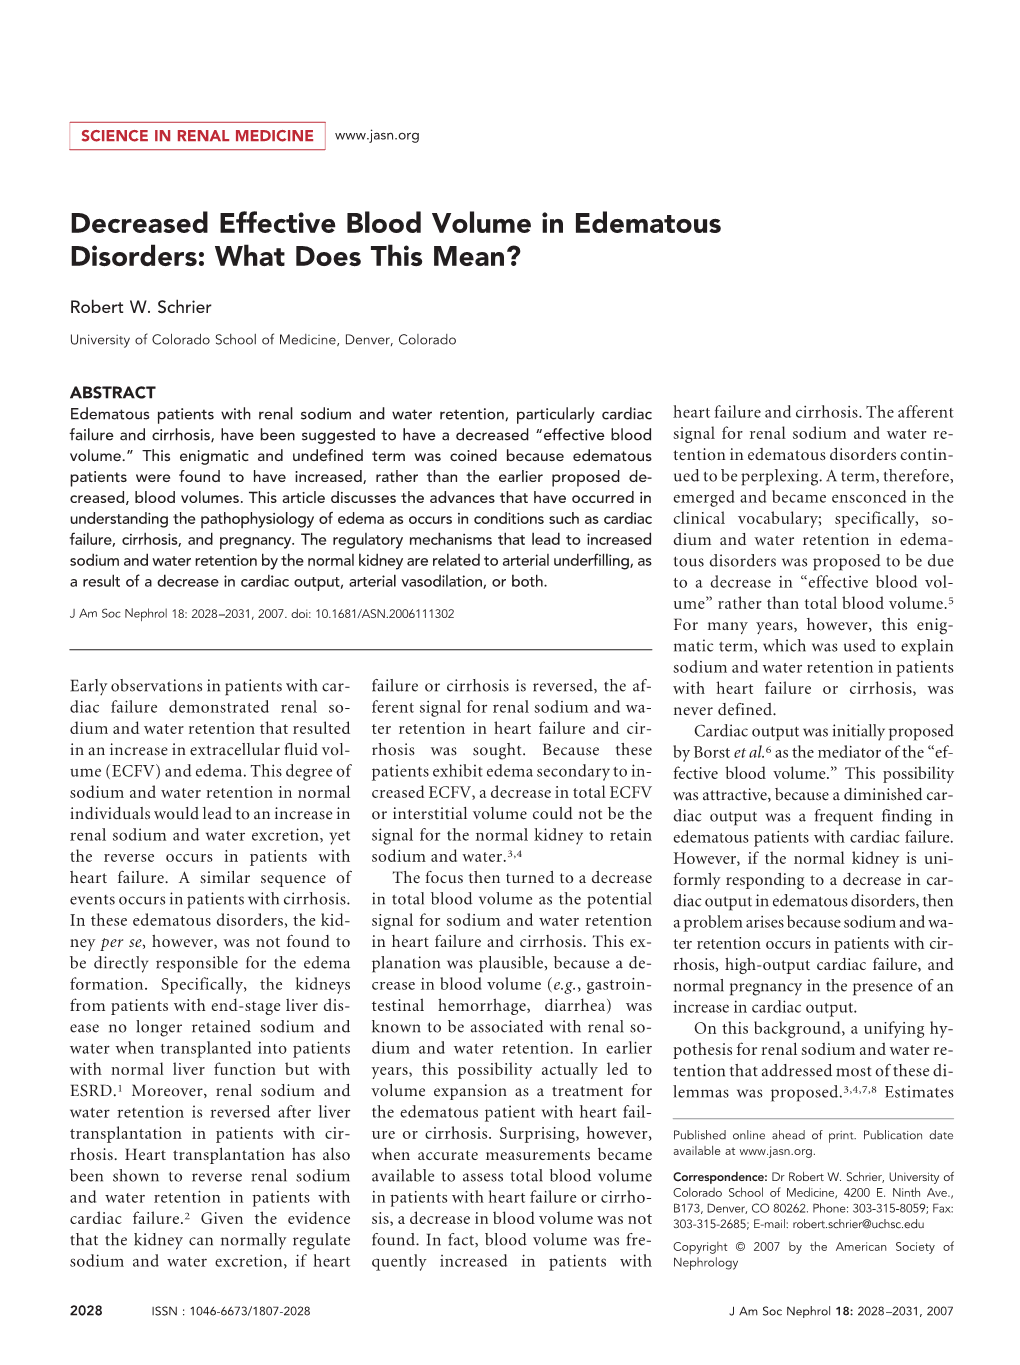 Decreased Effective Blood Volume in Edematous Disorders: What Does This Mean?